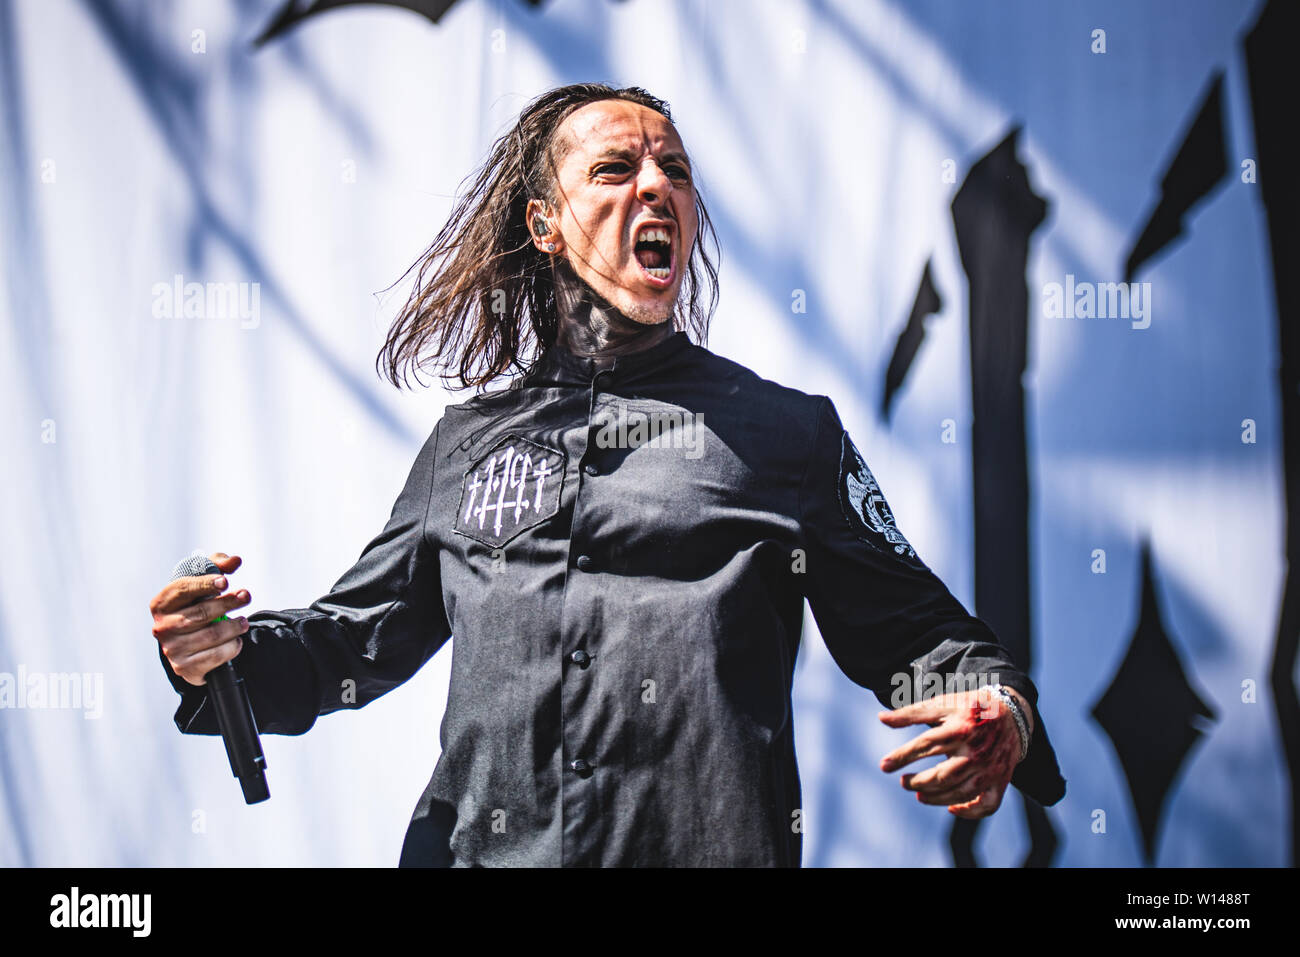 Andrea Ferro, singer of the Italian gothic metal band Lacuna Coil,  performing live on stage in Bologna, at the Bologna Sonic Park 2019 first  ever edition, opening for Slipknot. (Photo by Alessandro